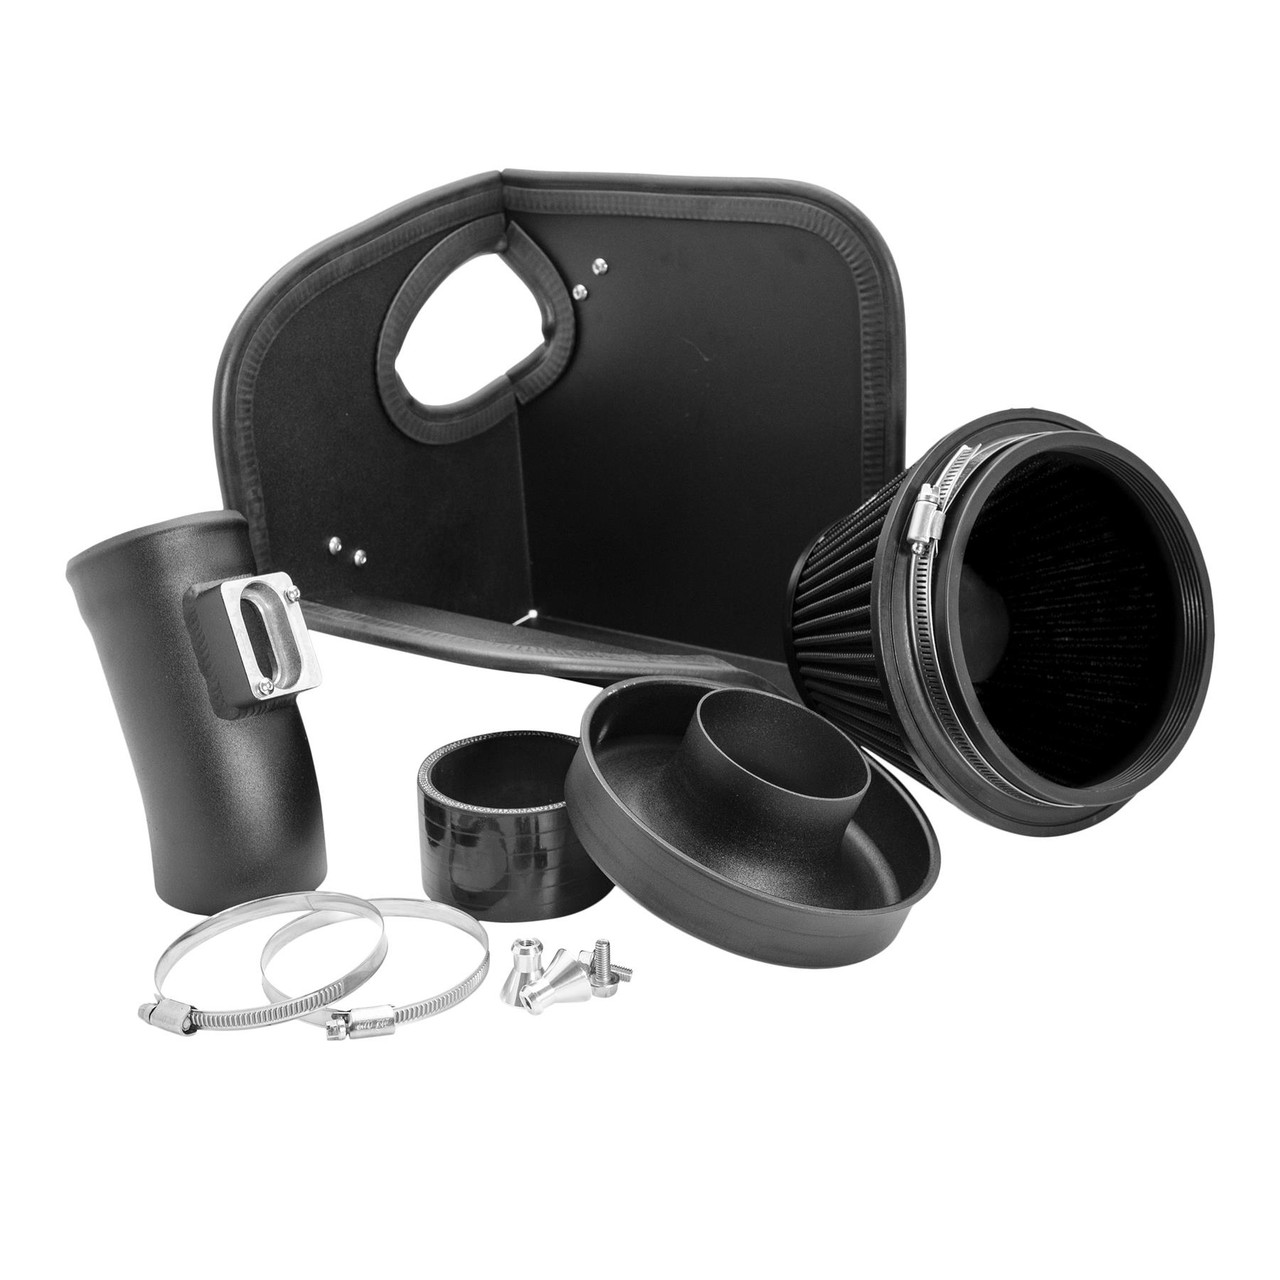 Ramair PRK-138-OVAL-BK - PRORAM Air Filter Intake Kit for F56 Mini Cooper S 1.5T 2.0T - Oval MAF_1